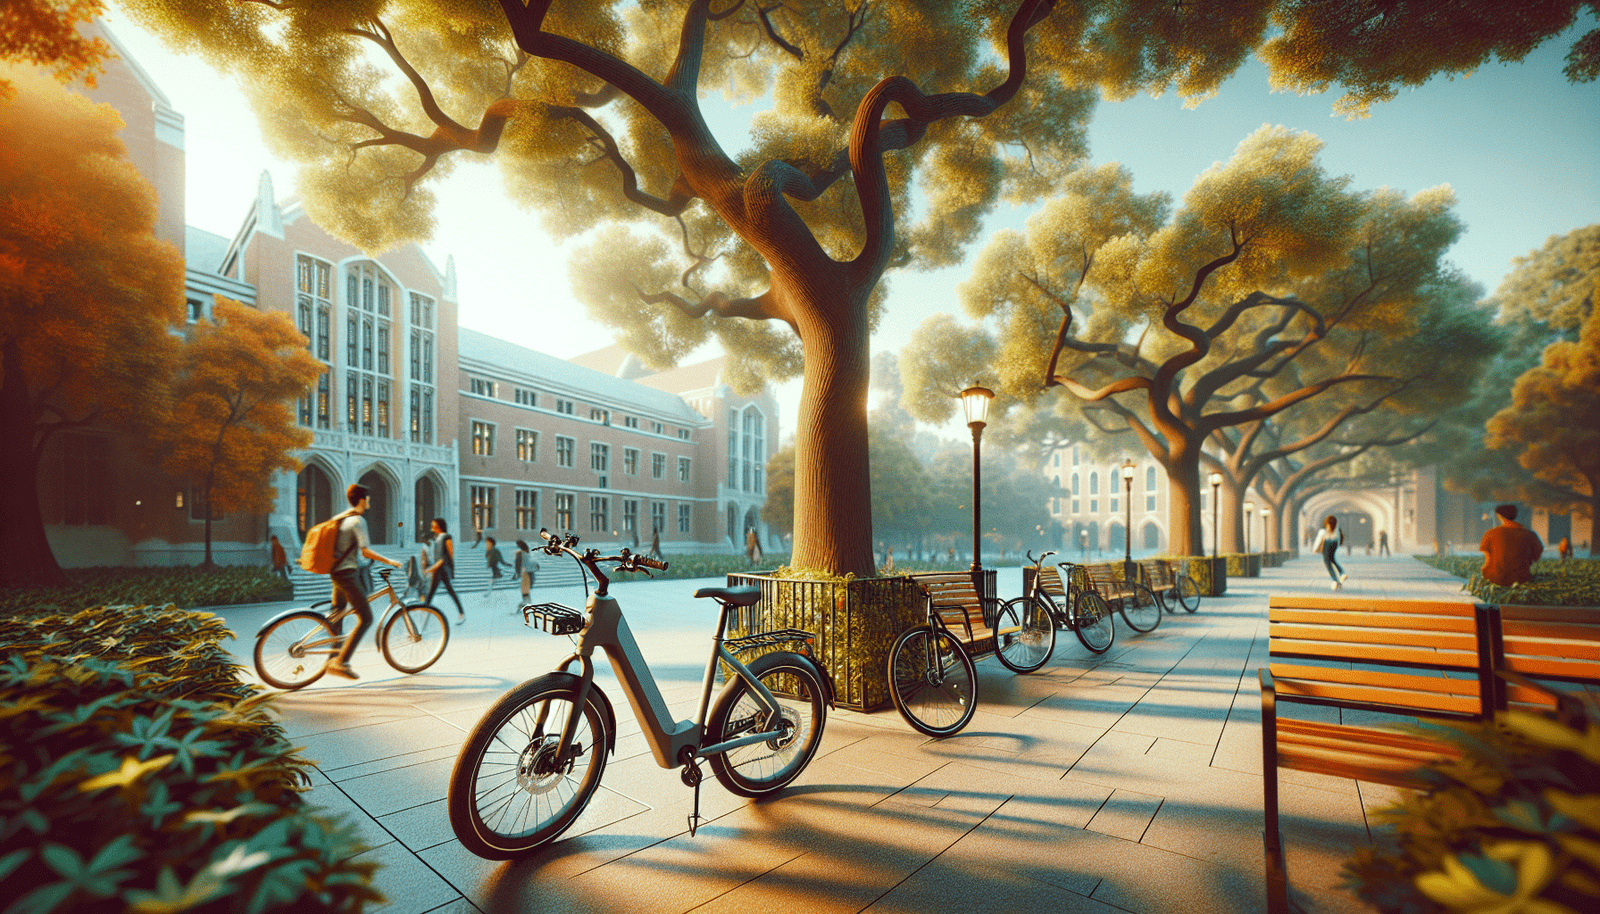 Are There Specific Rules For Using Electric Bikes On College Campuses?